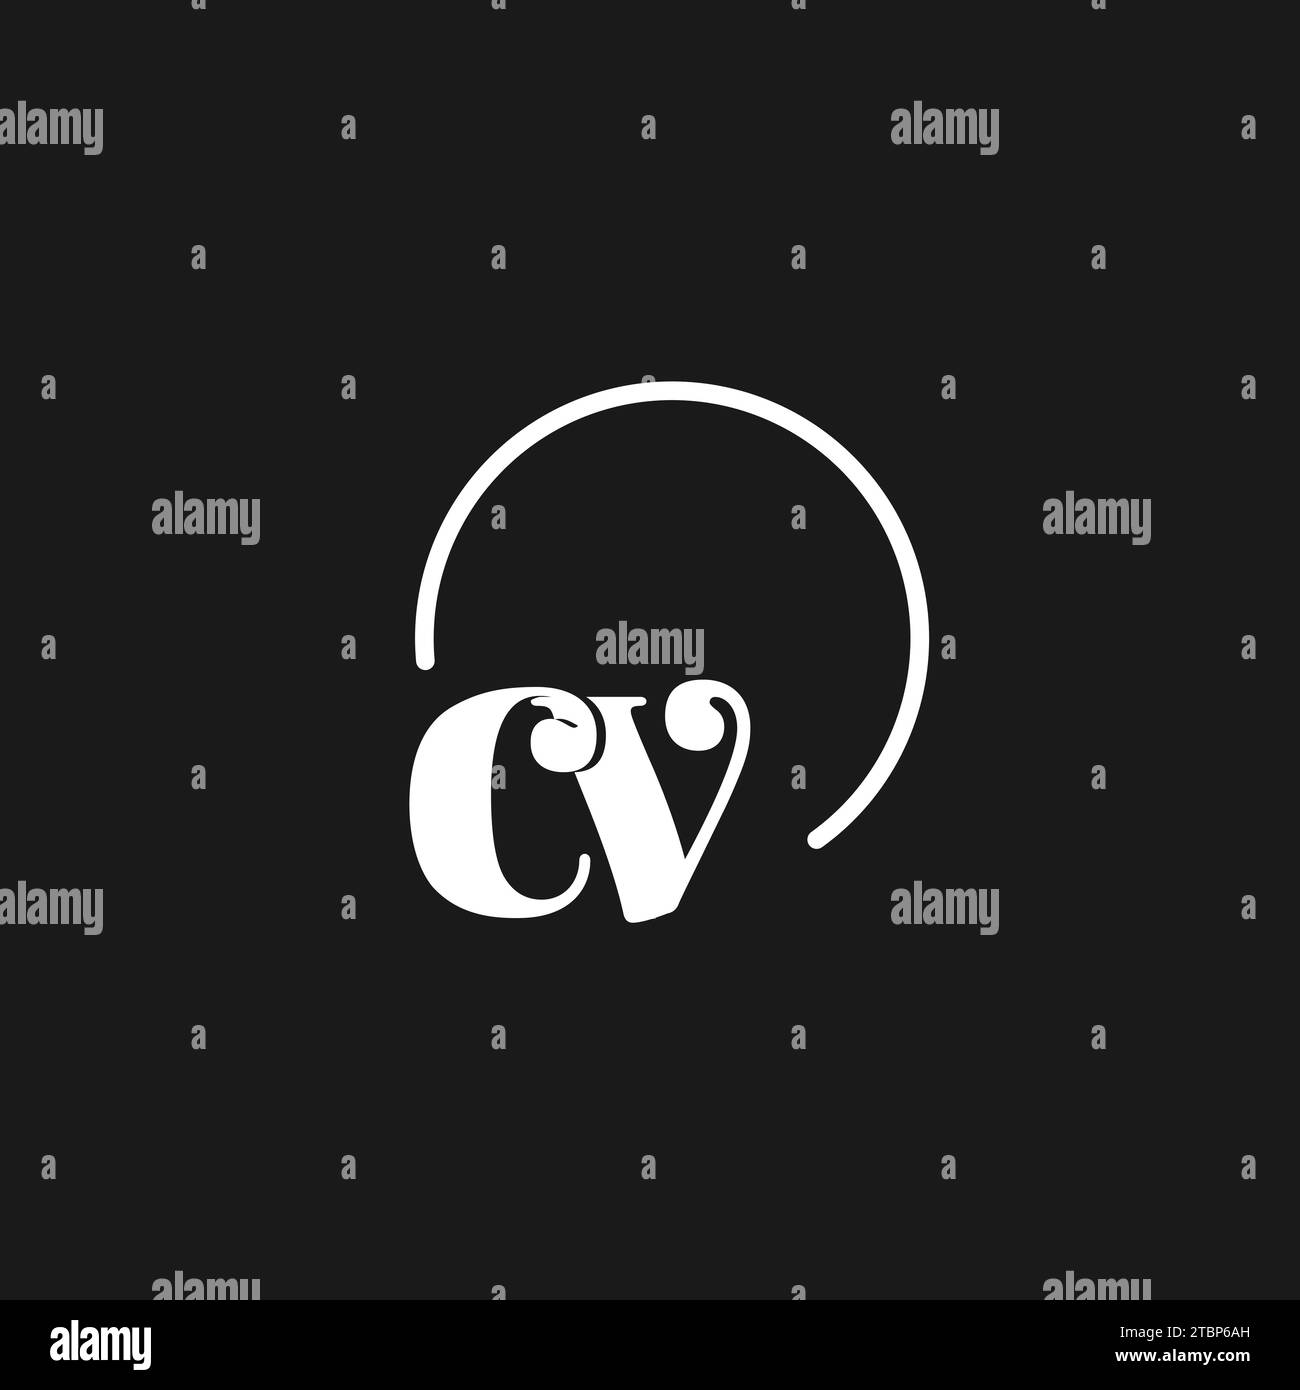 CV logo initials monogram with circular lines, minimalist and clean logo design, simple but classy style vector graphic Stock Vector